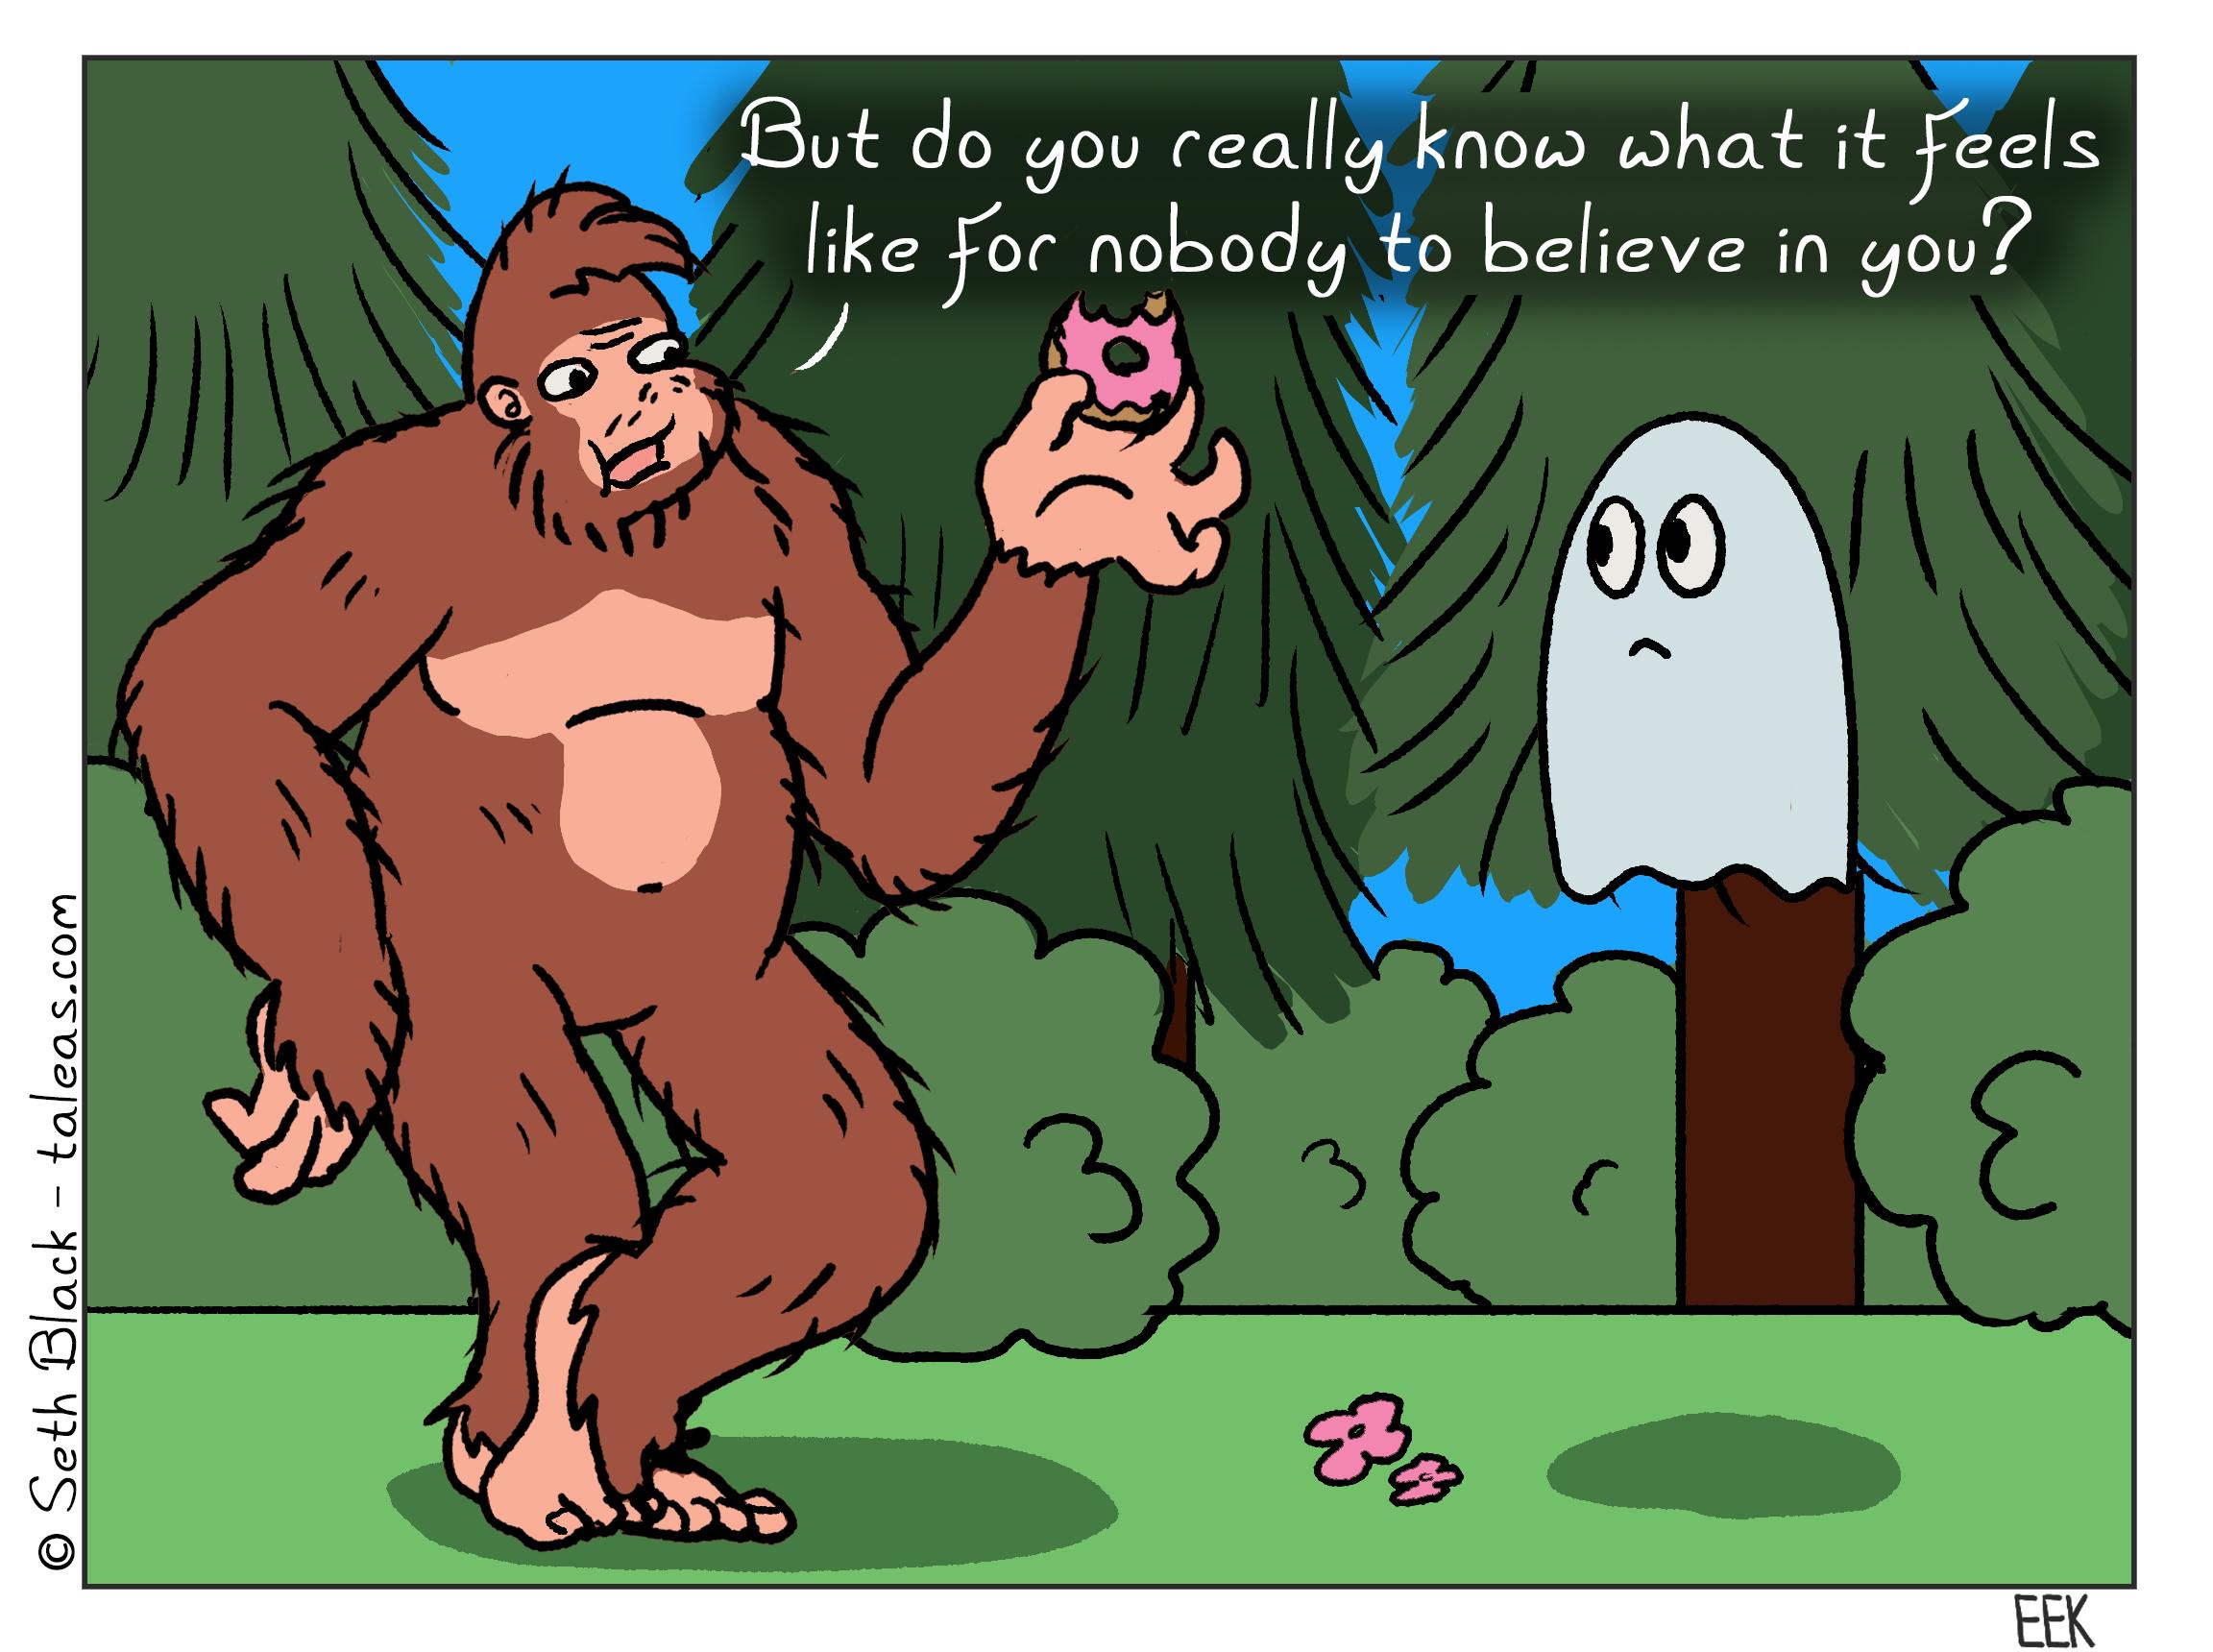 Bigfoot is chatting with a ghost in a forest, lamenting "But do you really know what it feels like for nobody to believe in you?" As is with tradition, Bigfoot is eating a doughnut.